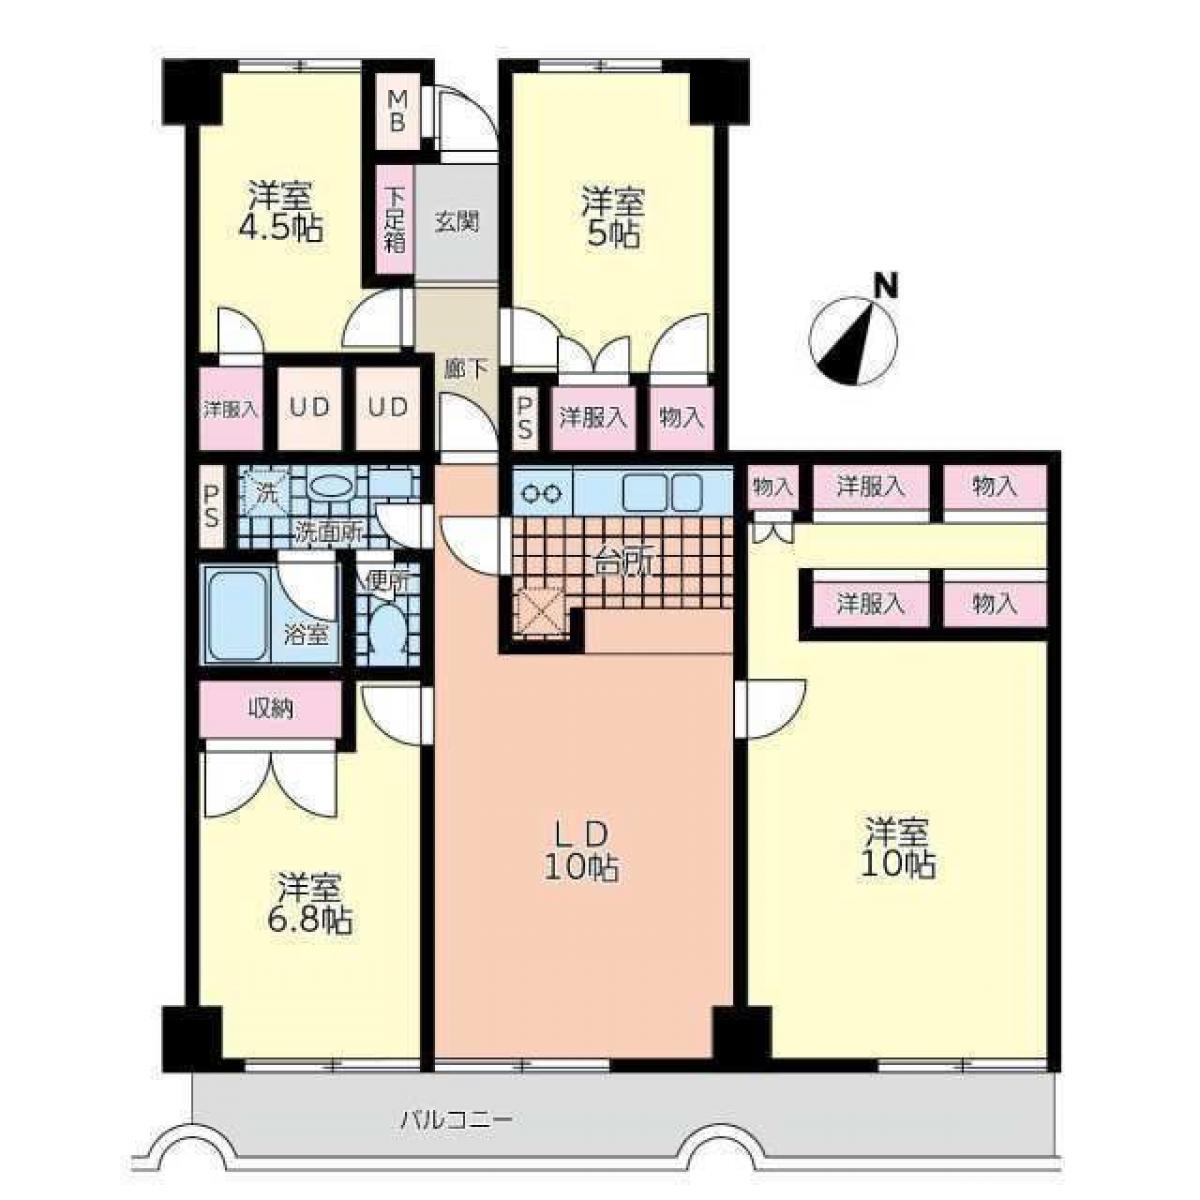 Picture of Apartment For Sale in Bunkyo Ku, Tokyo, Japan